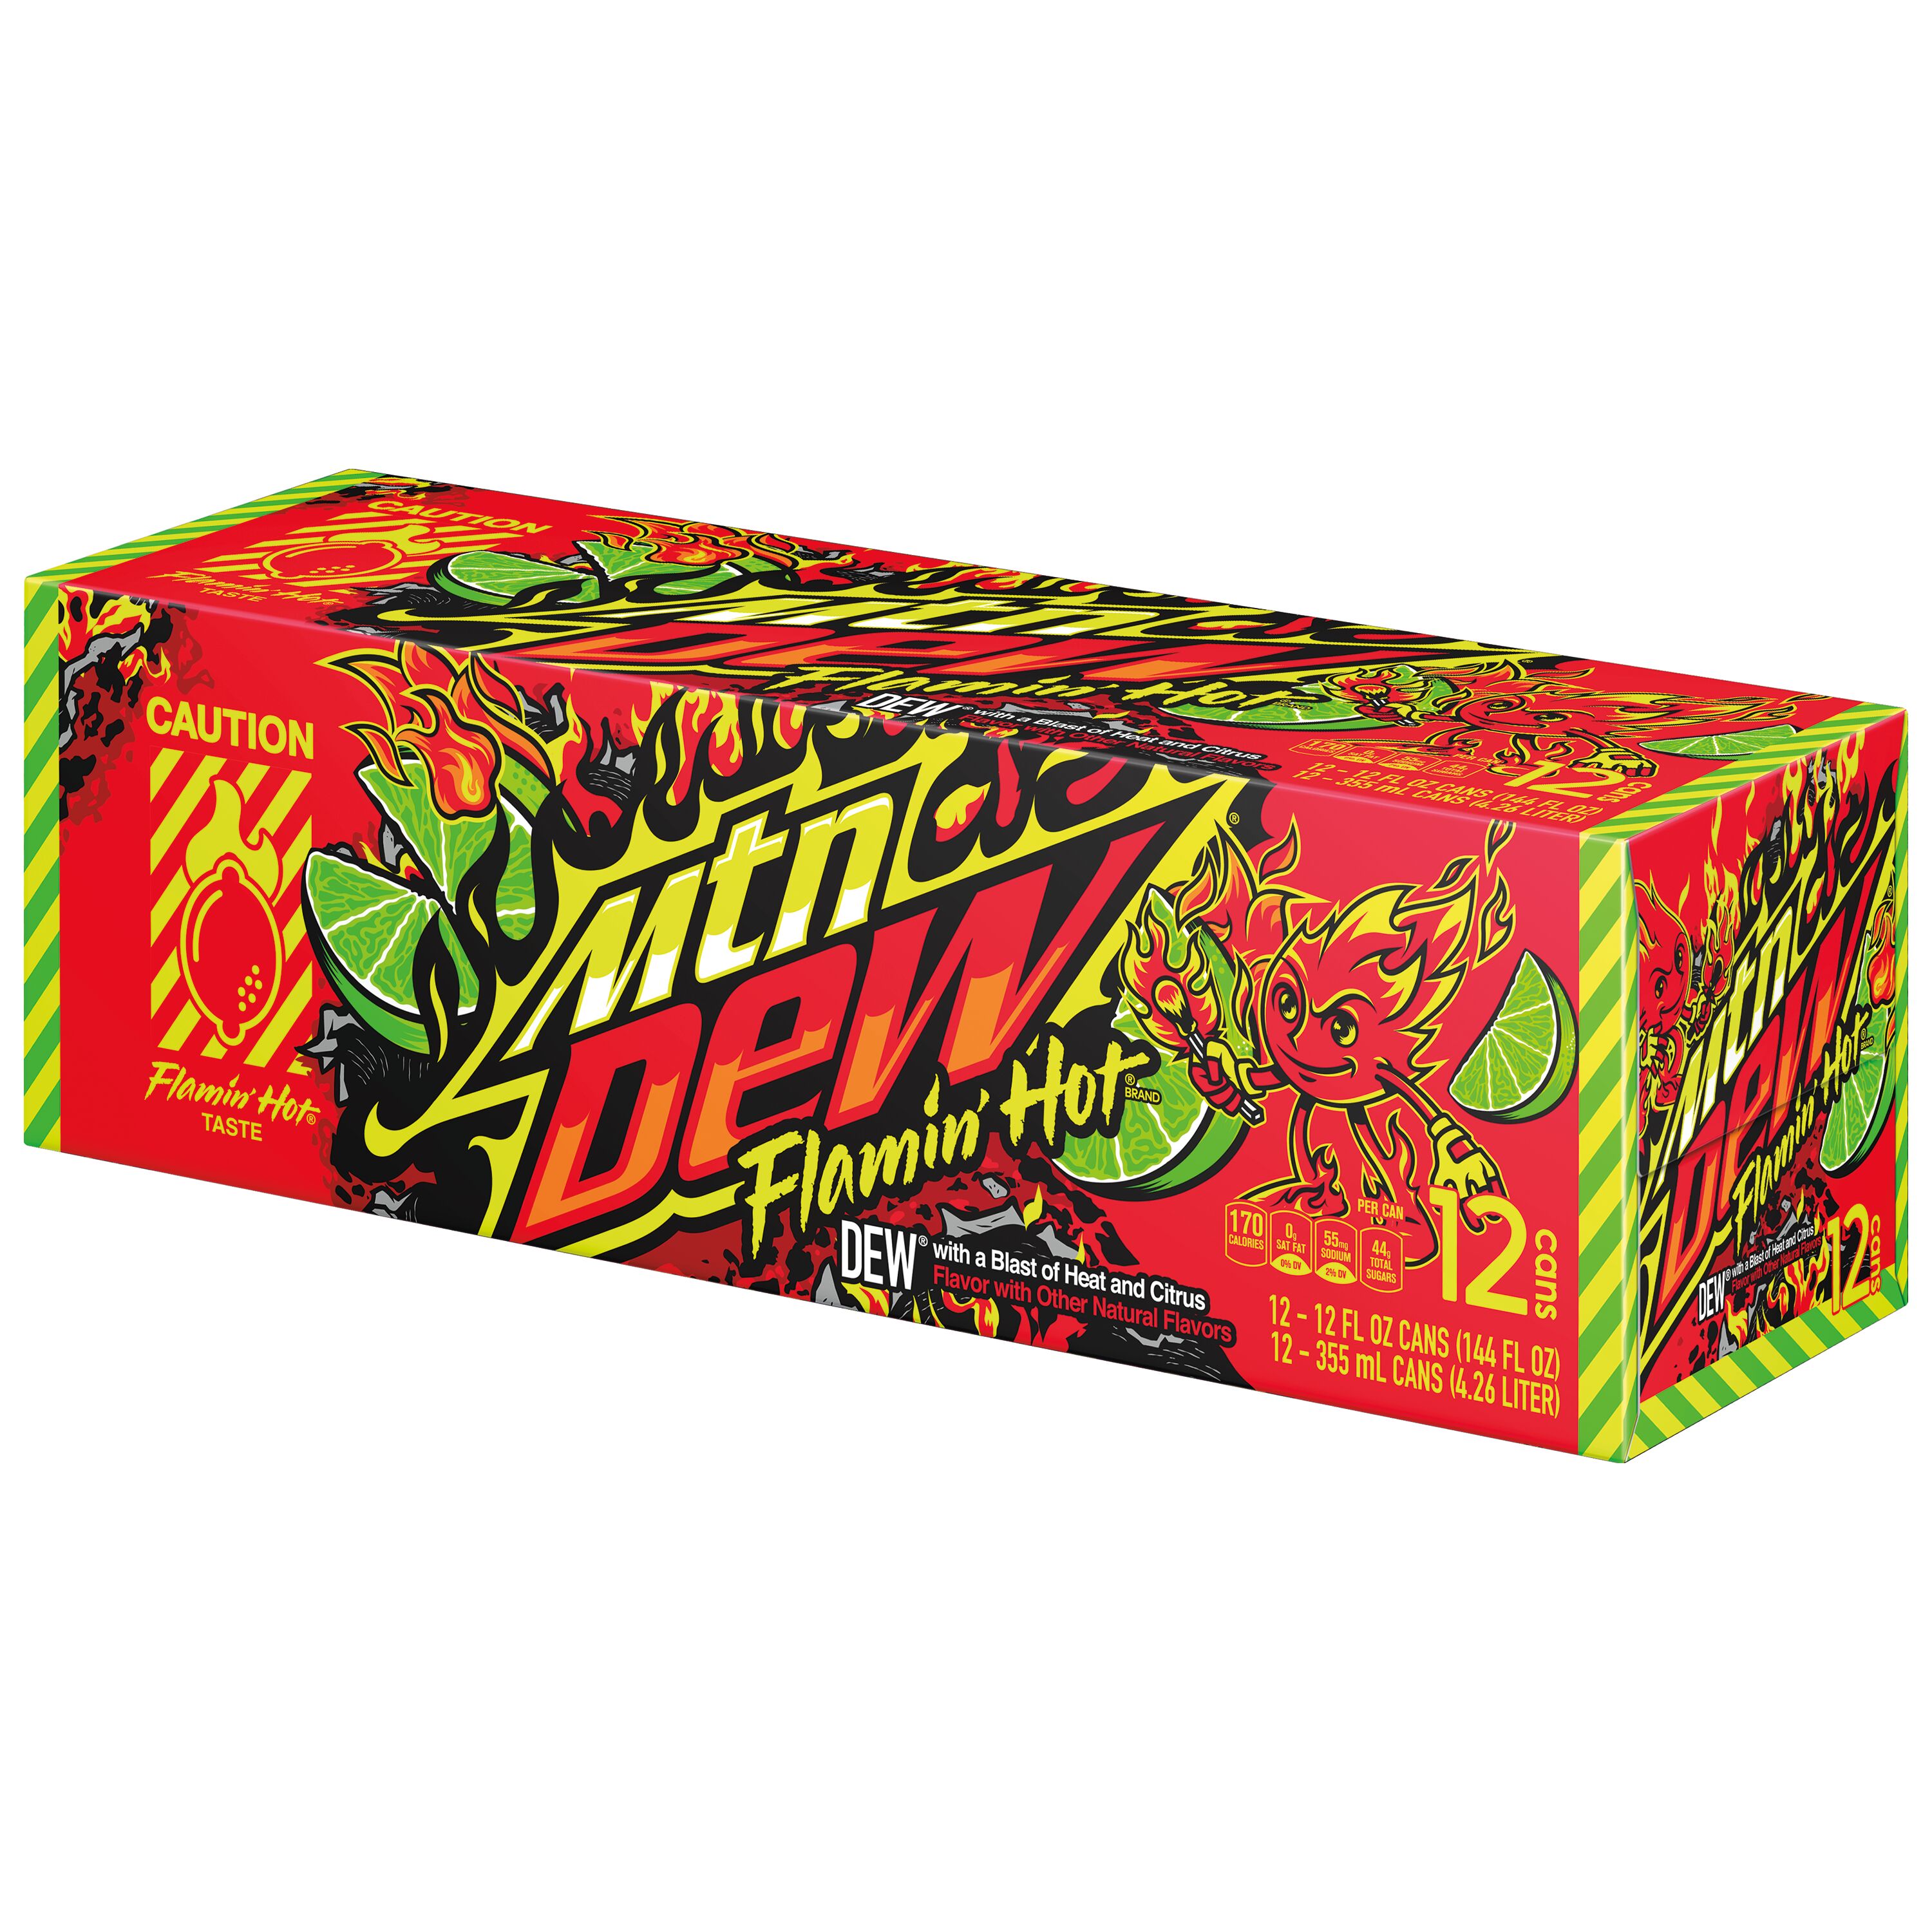 Mountain Dew Flamin' Hot,12 fl oz Can, 12 pack - image 1 of 5